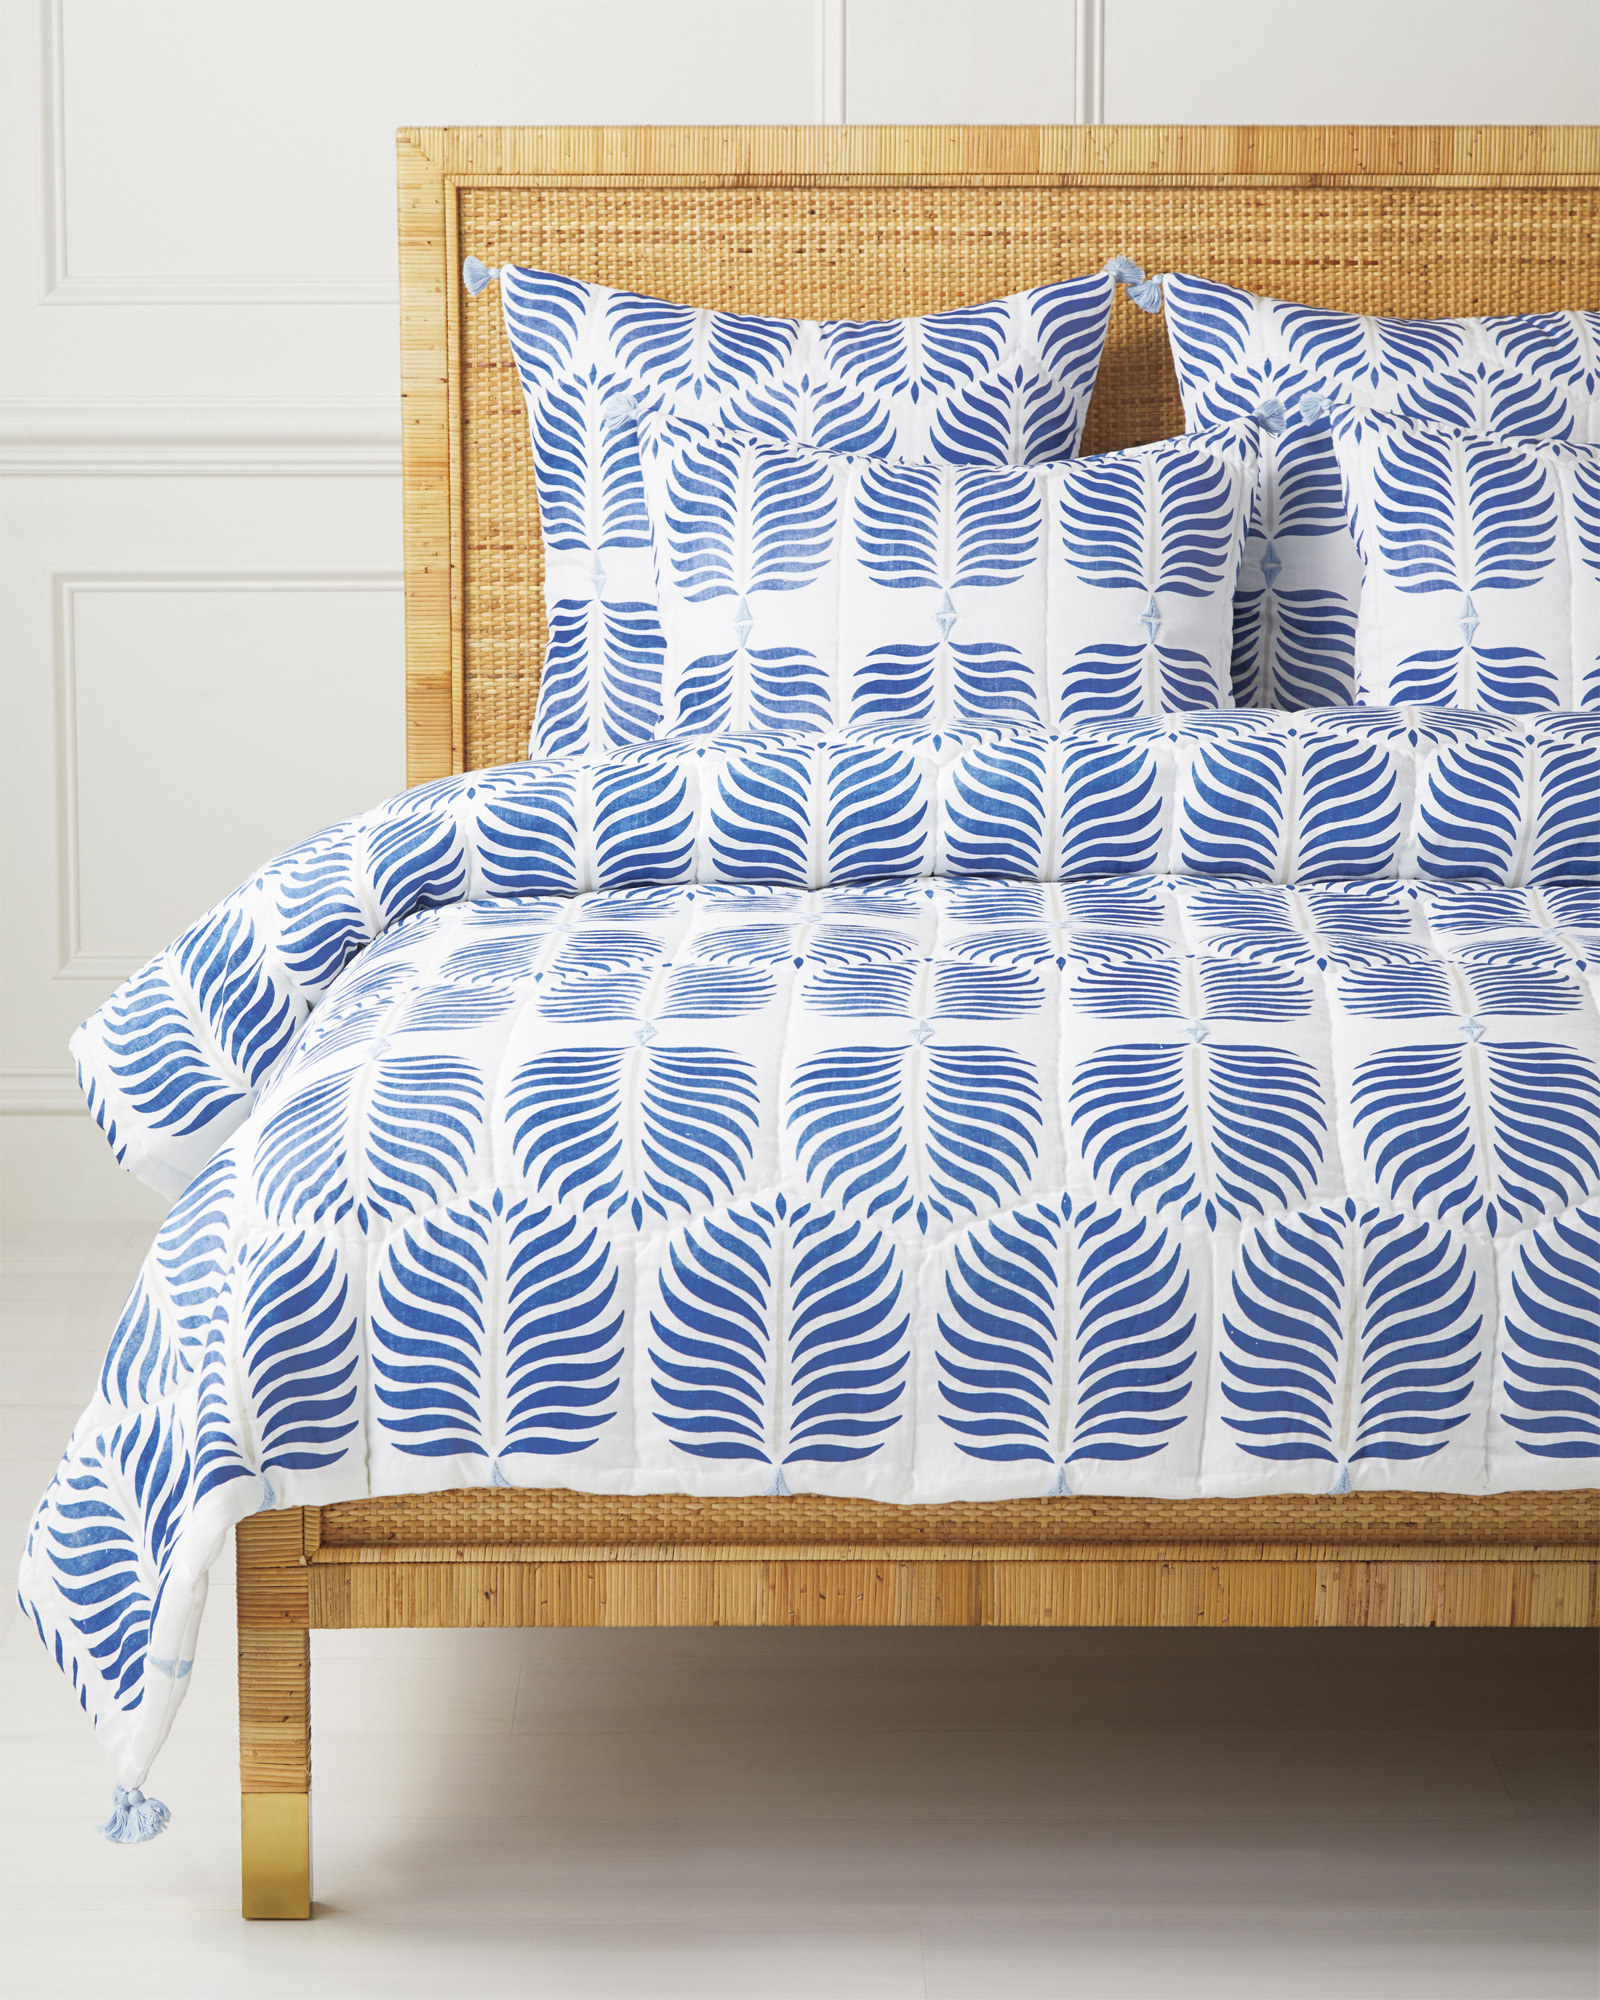 Image of the blue and white bedding